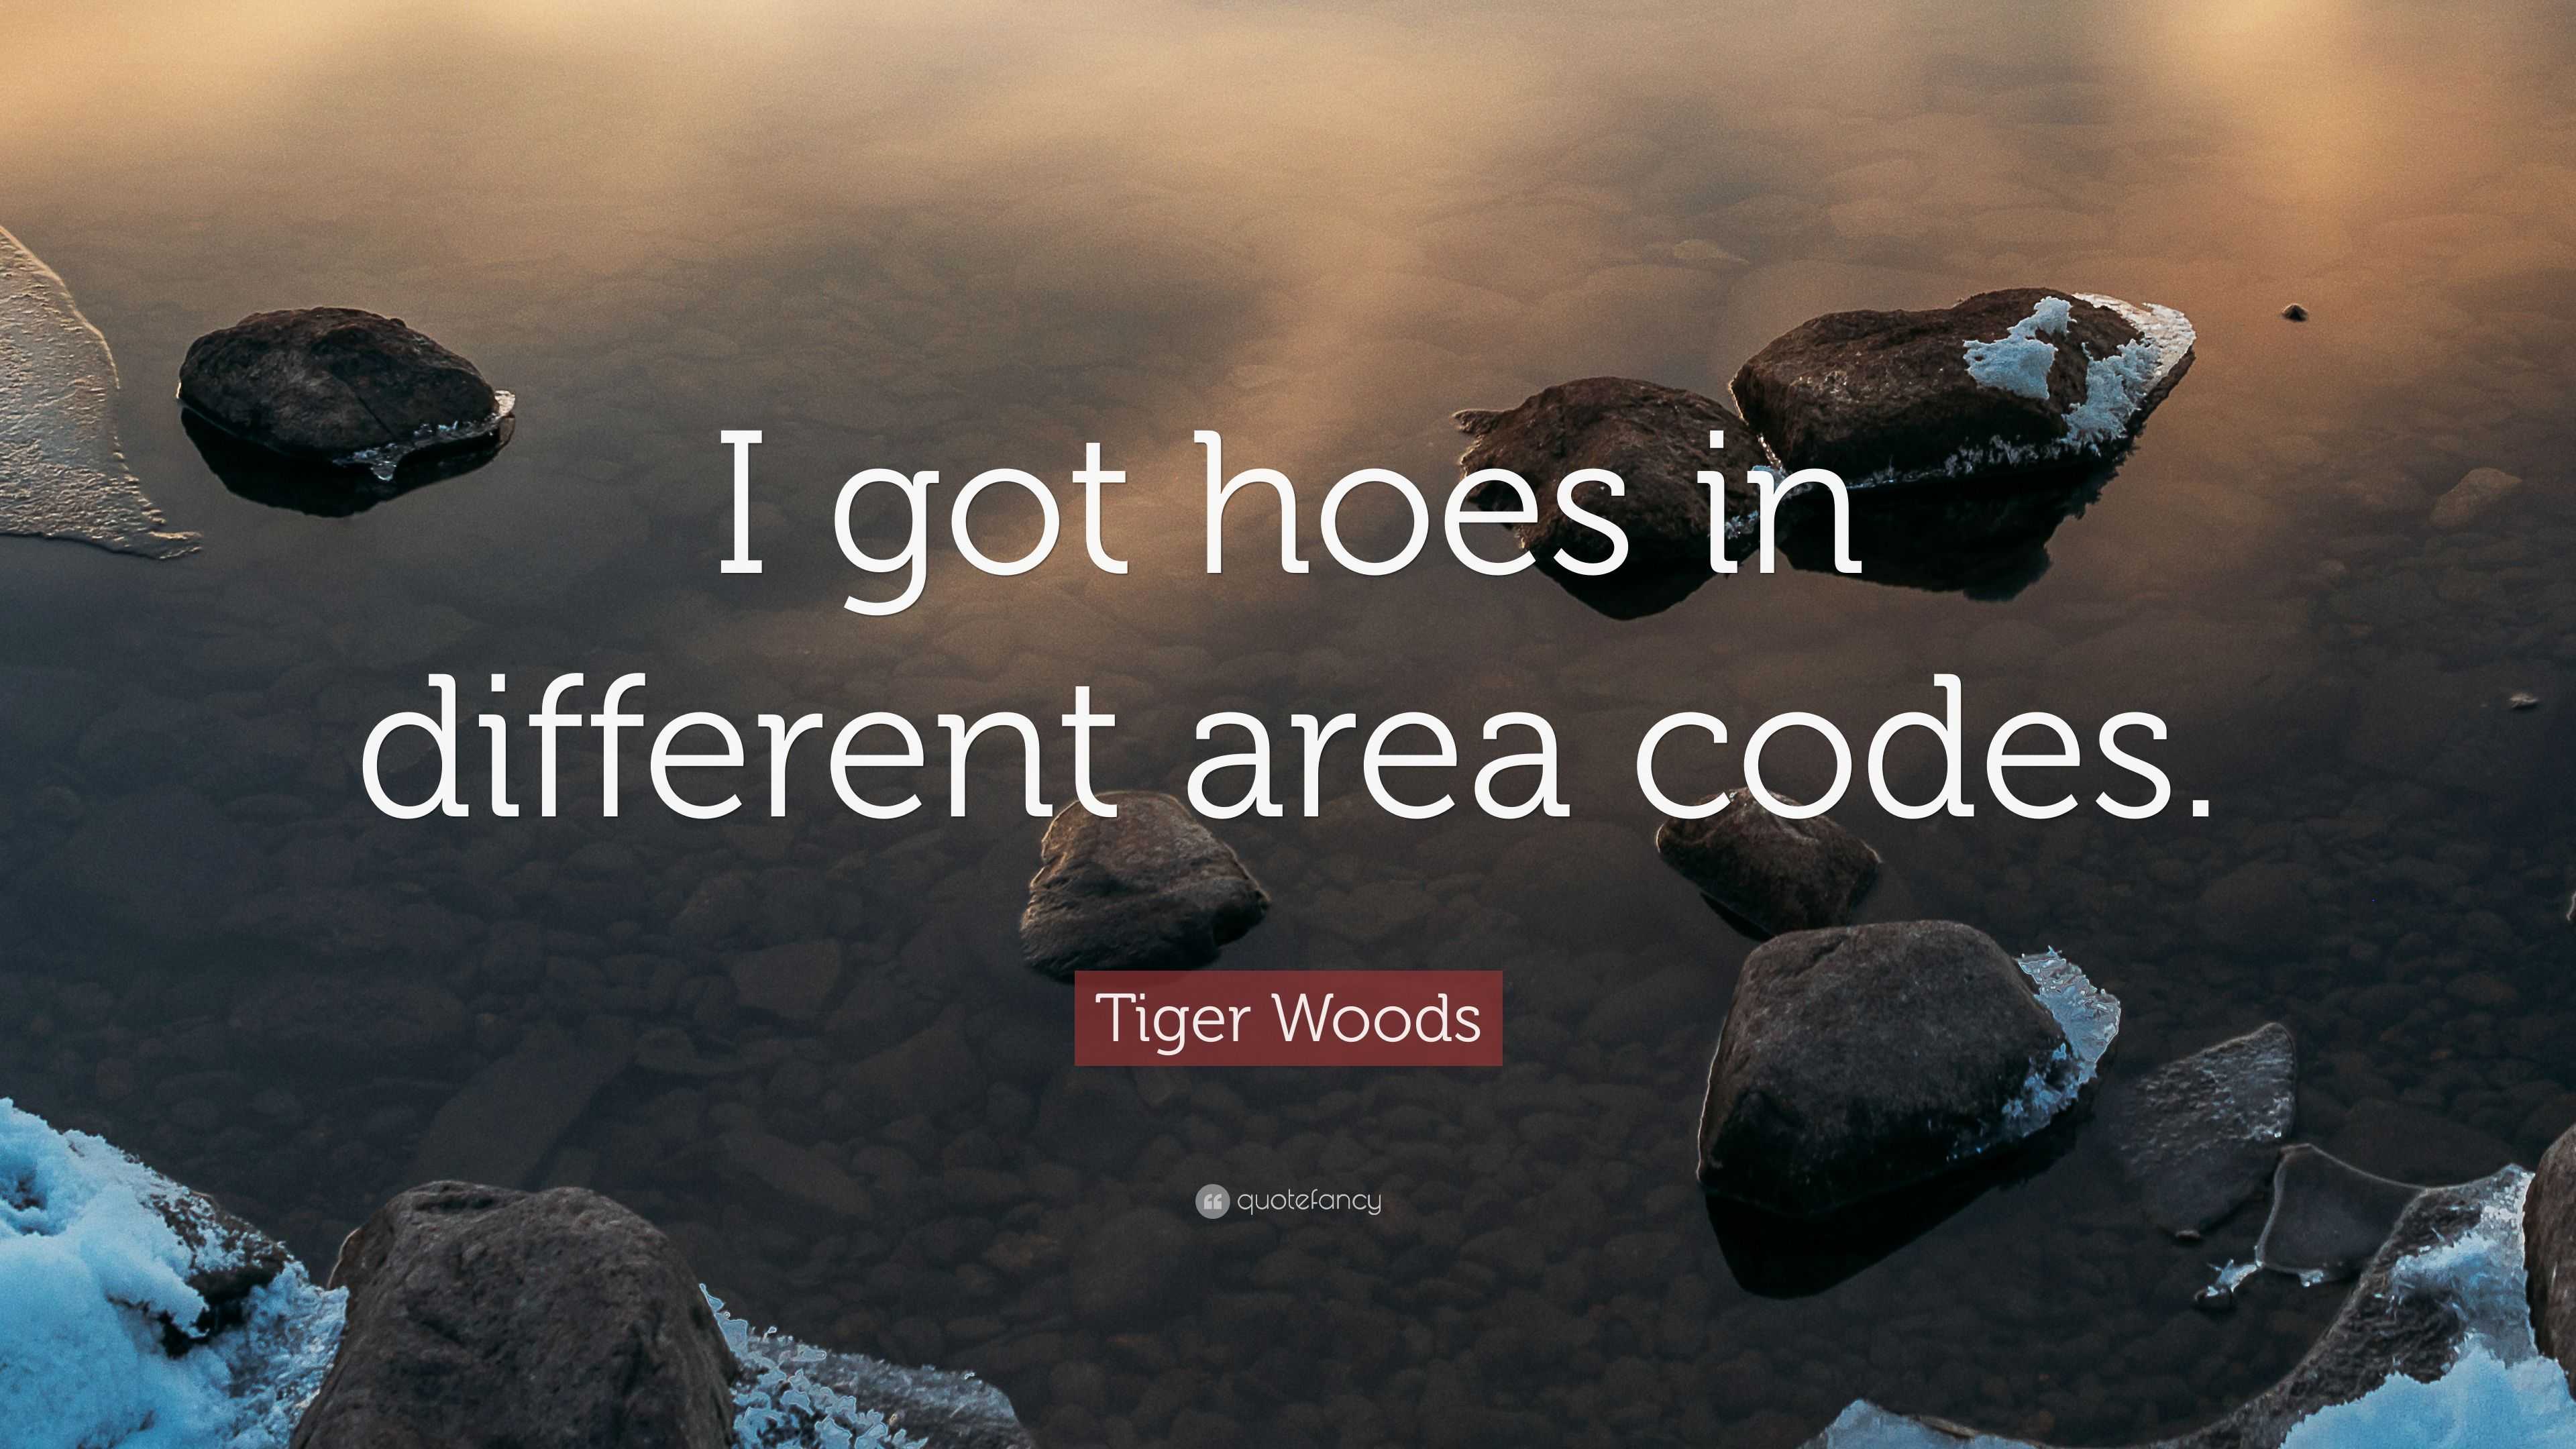 Tiger Woods Quote “I got hoes in different area codes.”